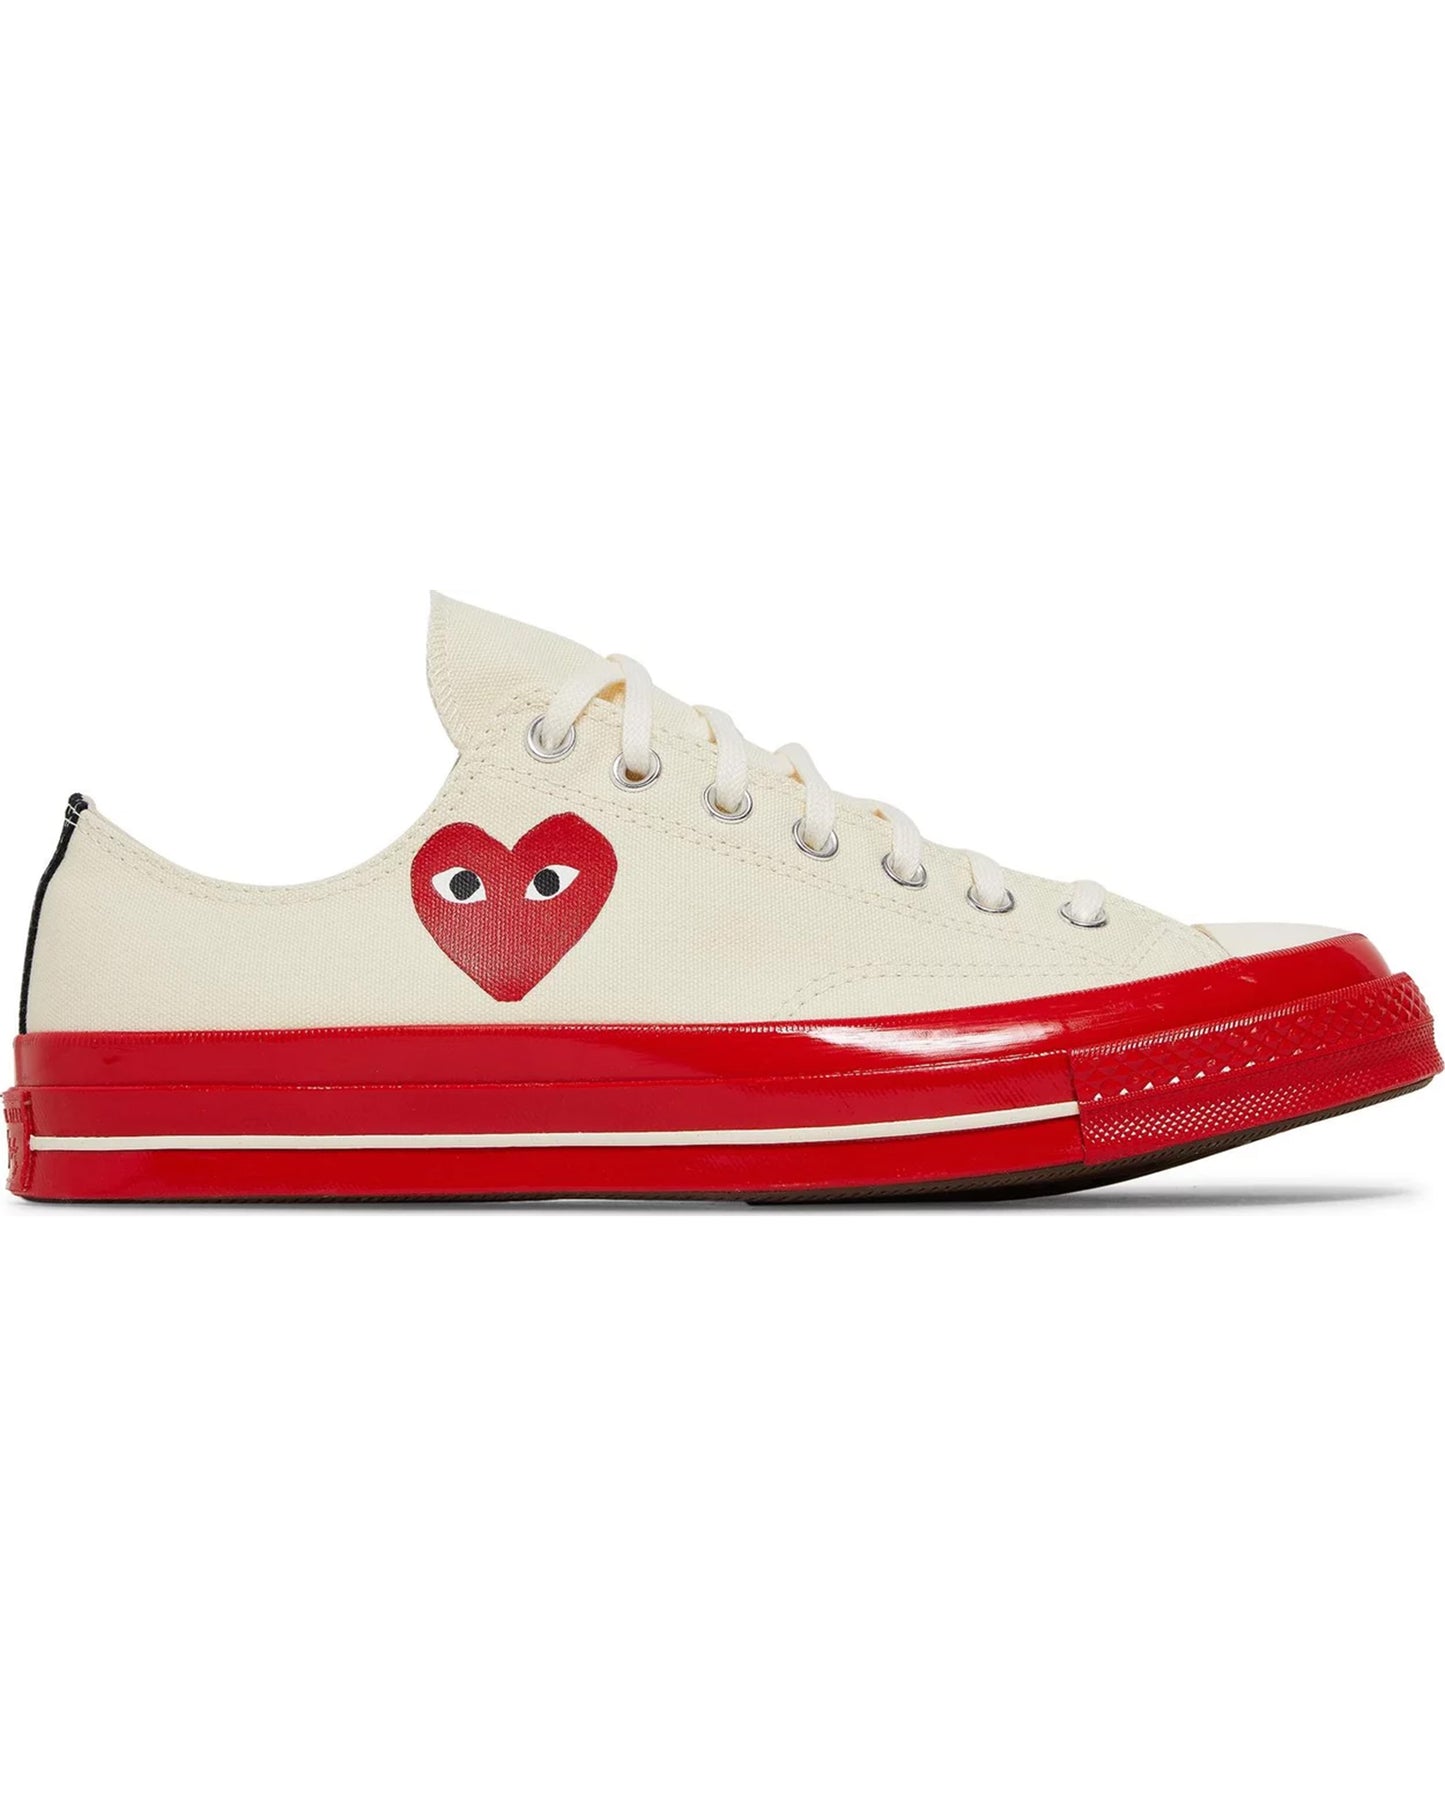 Comme Garcons Chuck 70 Ox | STASHED